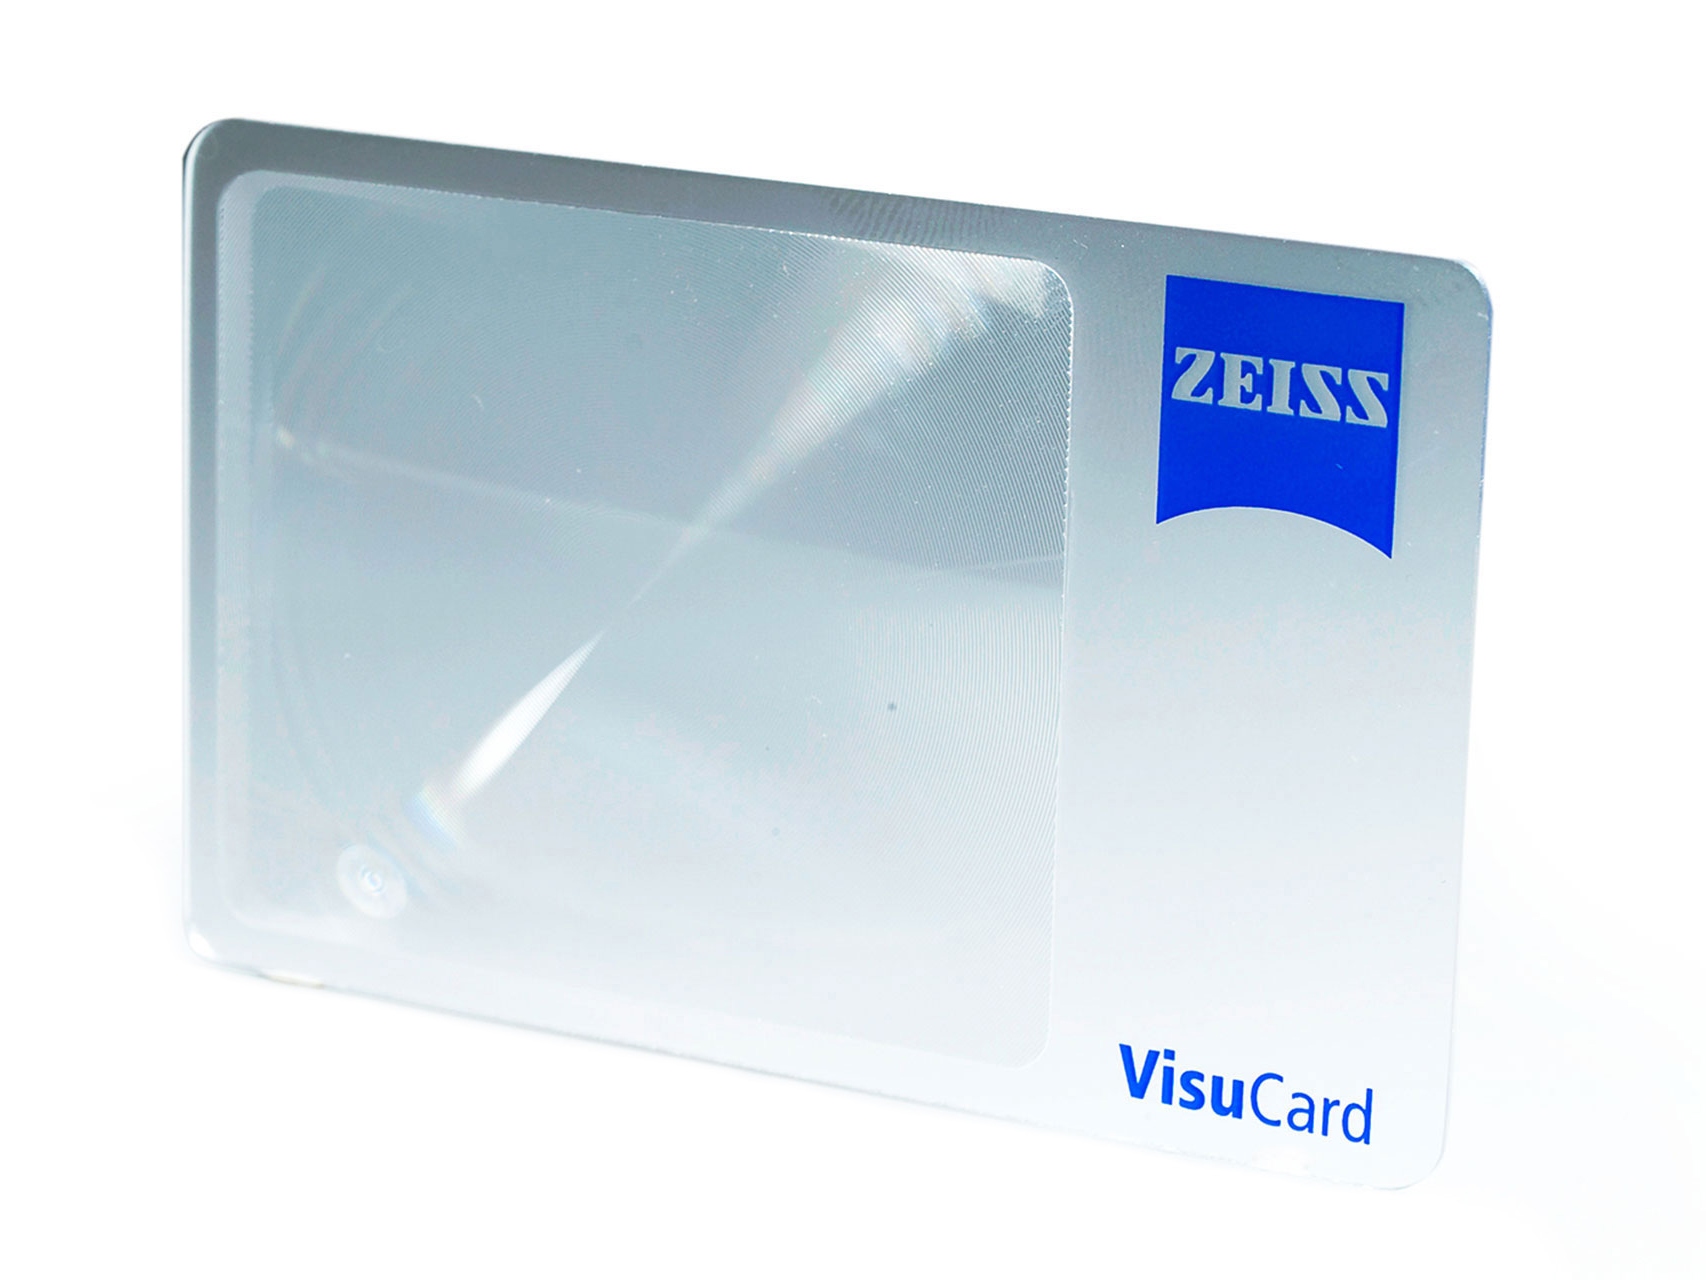 Magnifier by ZEISS in cheque card format.